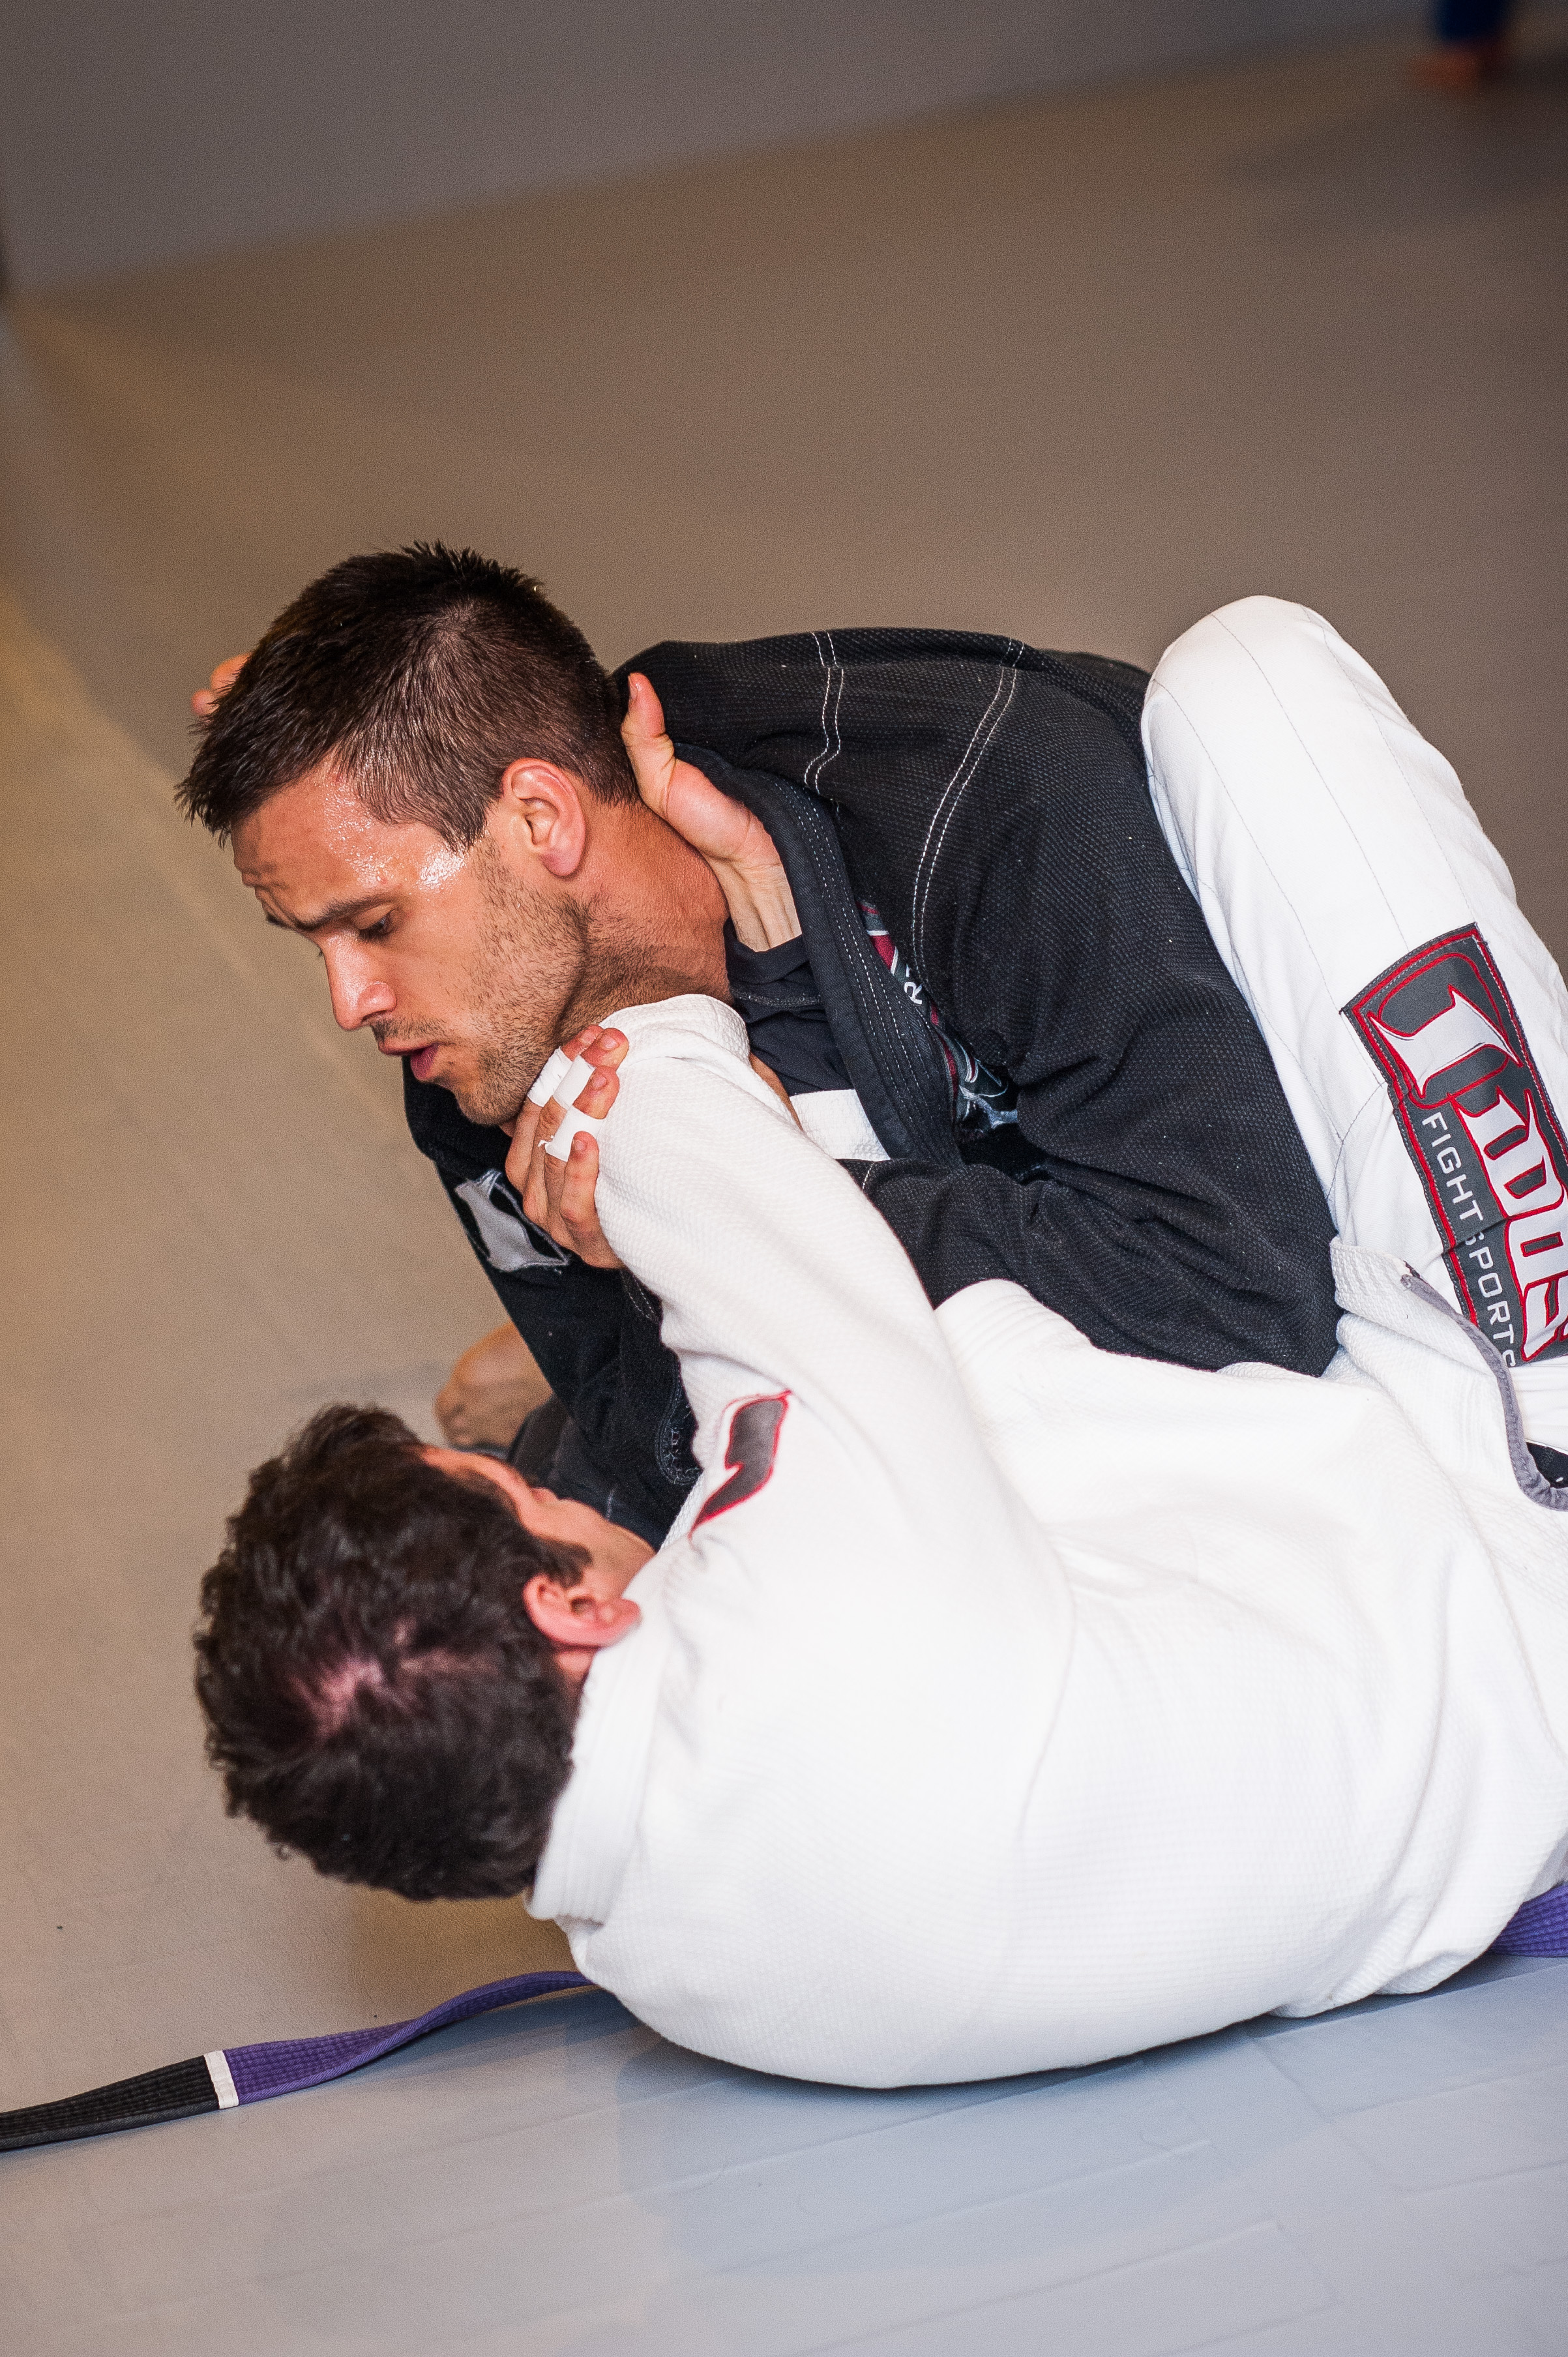 Learn BJJ More Effectively With Great Training Partners